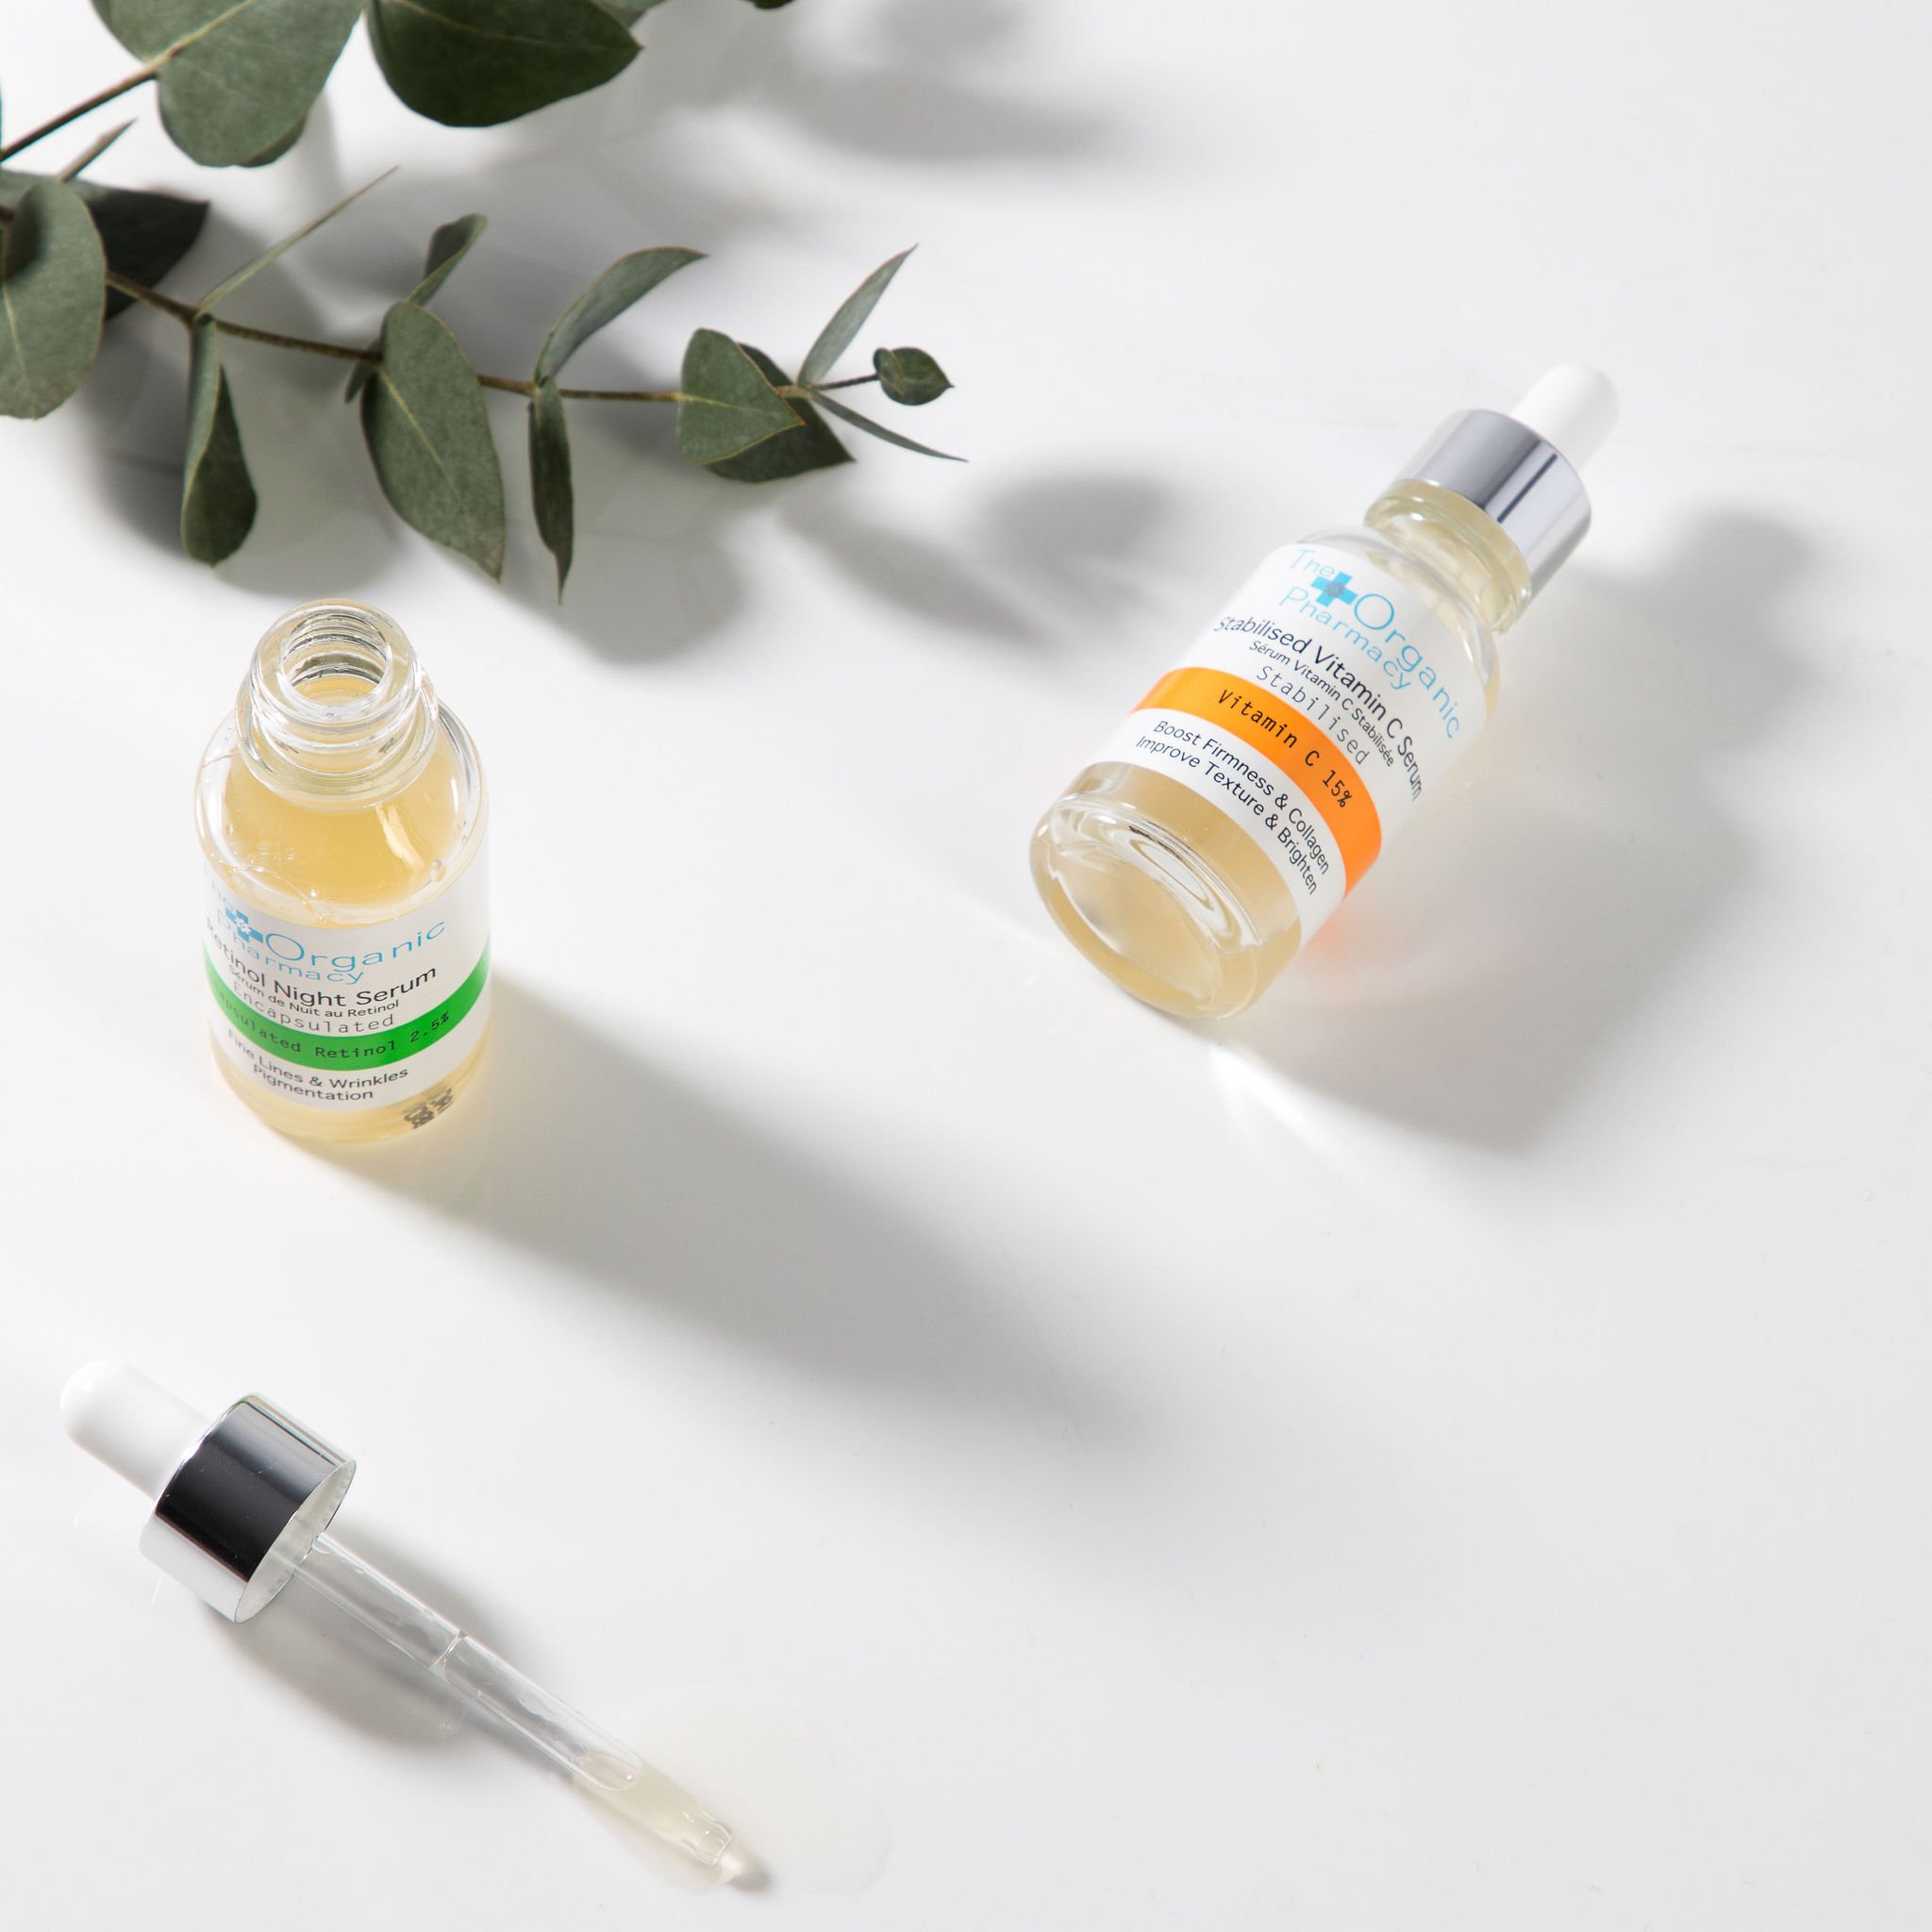 The Organic Pharmacy on Twitter: "Are you looking for a product to lighten and brighten your skin? Try our Stabilised Vitamin C Serum - a must-have for those who want